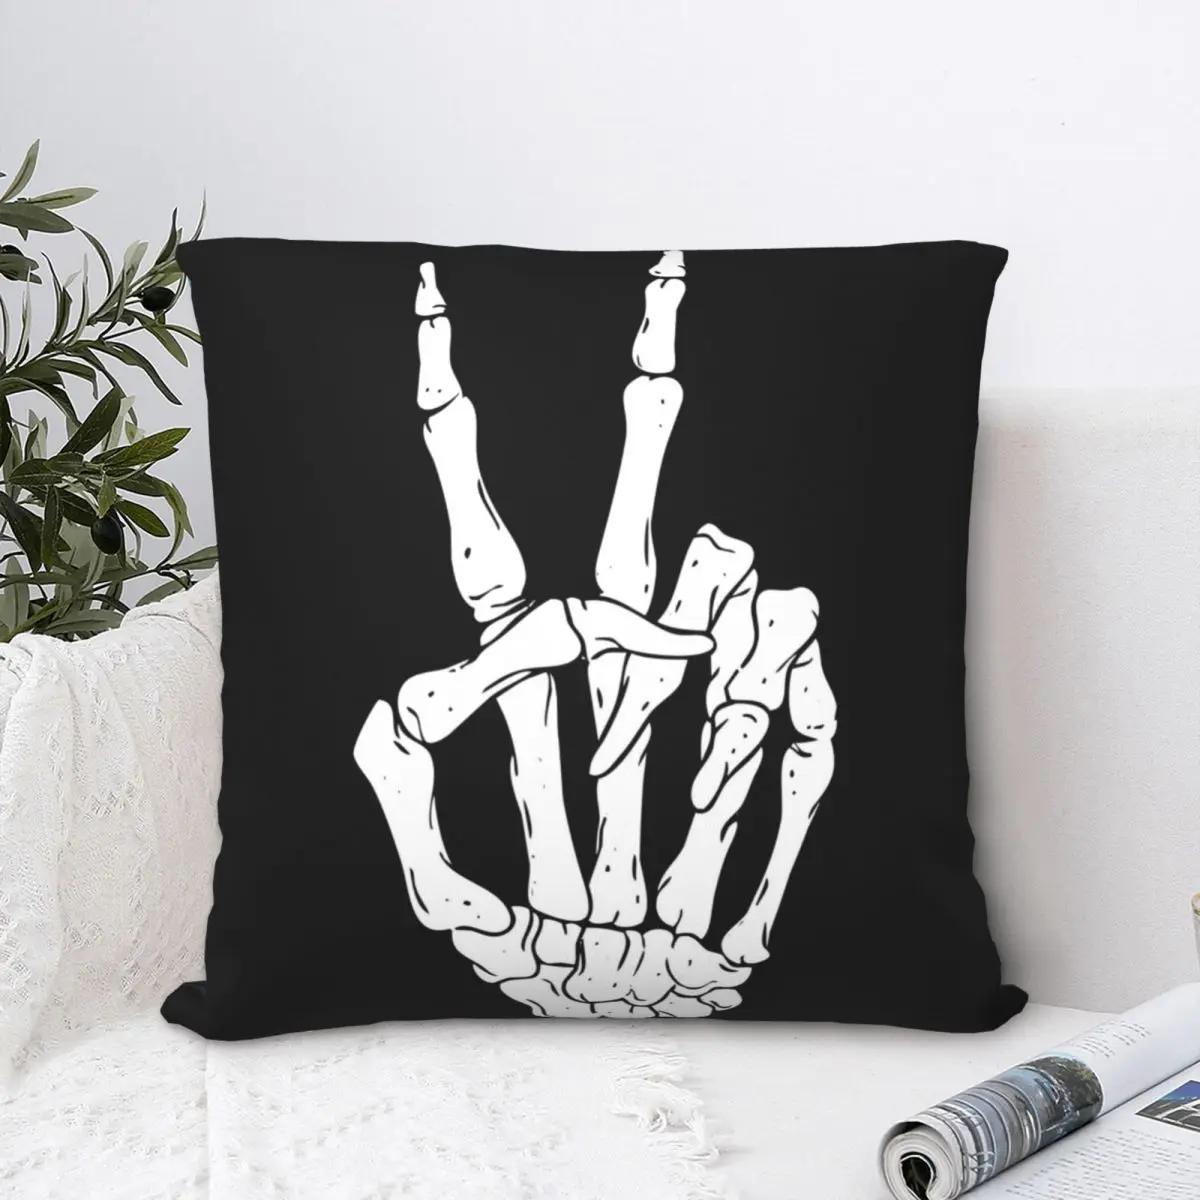 

Rocker Hand Square Pillowcase Cushion Cover Spoof Zipper Home Decorative Polyester Throw Pillow Case for Sofa Nordic 45*45cm